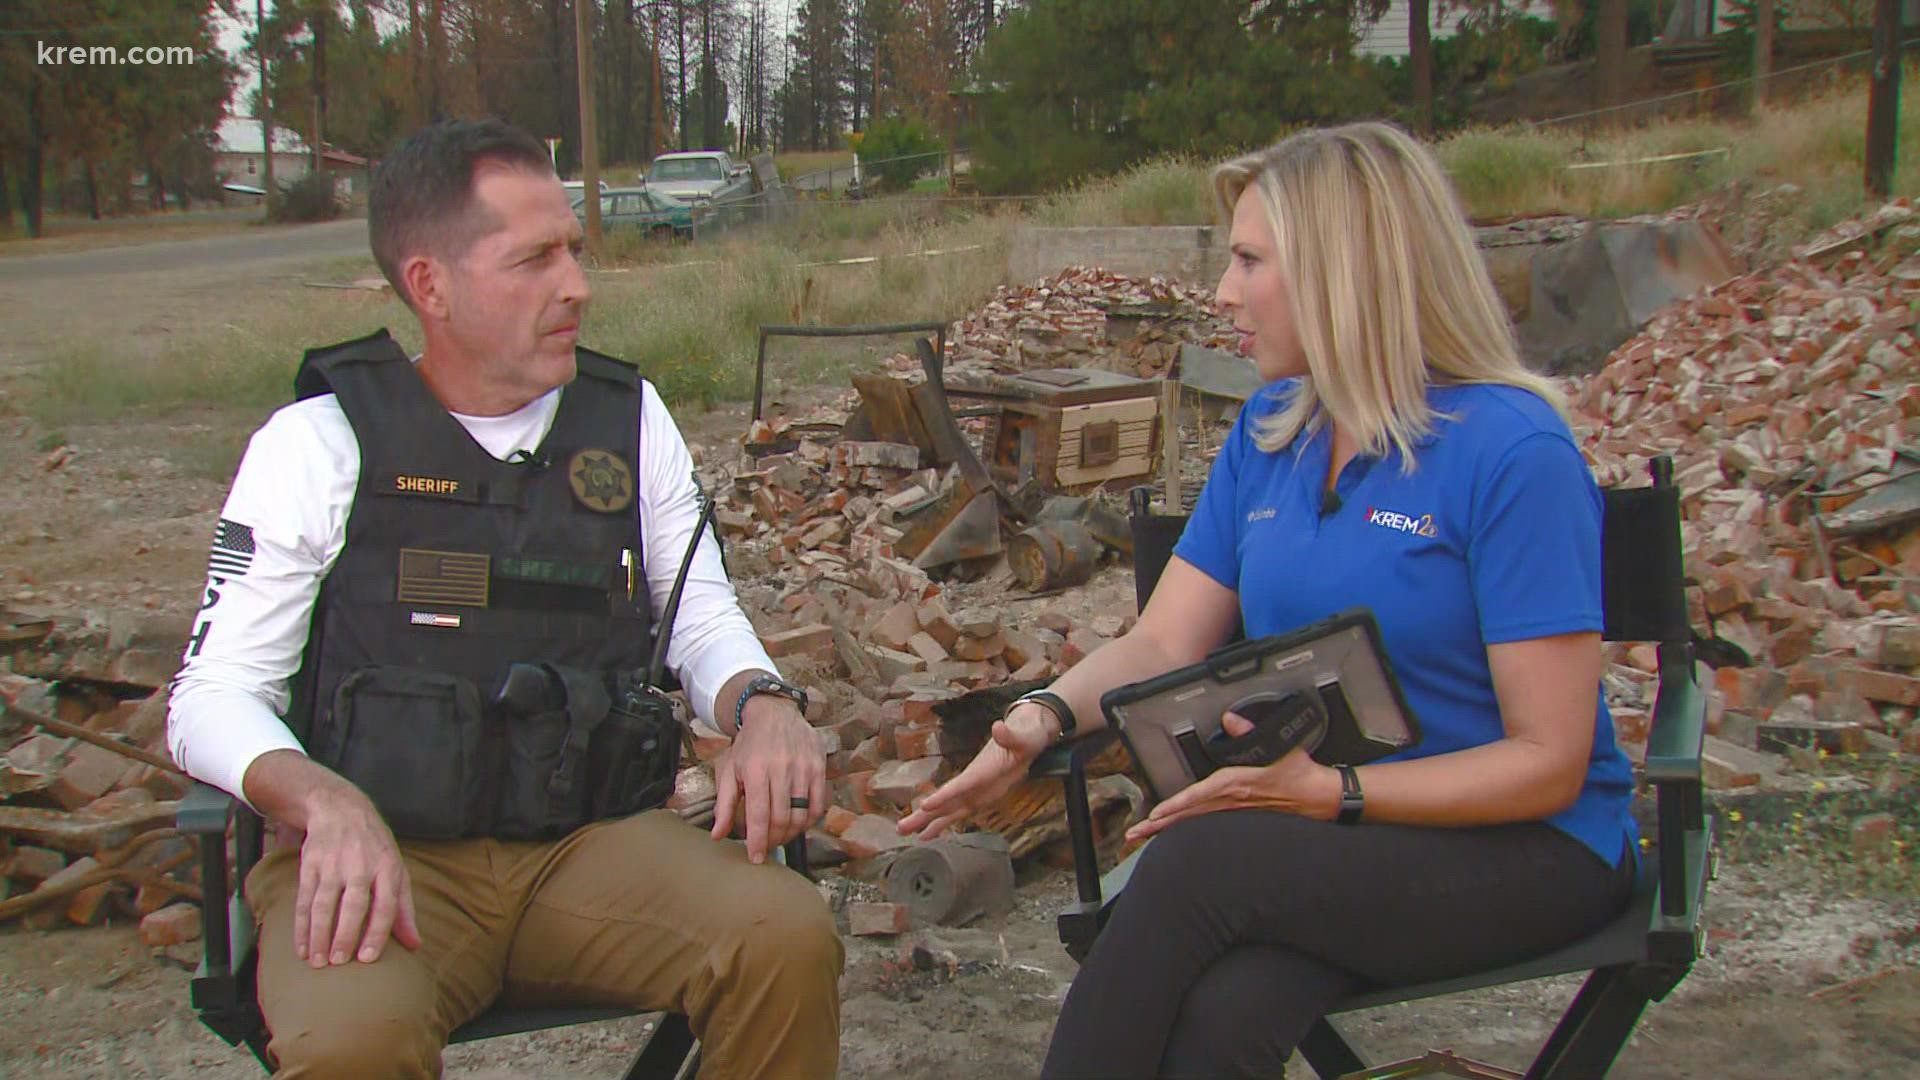 Whitman County sheriff talks about what happened the night a debased fire destroyed the town of Malden a year ago.